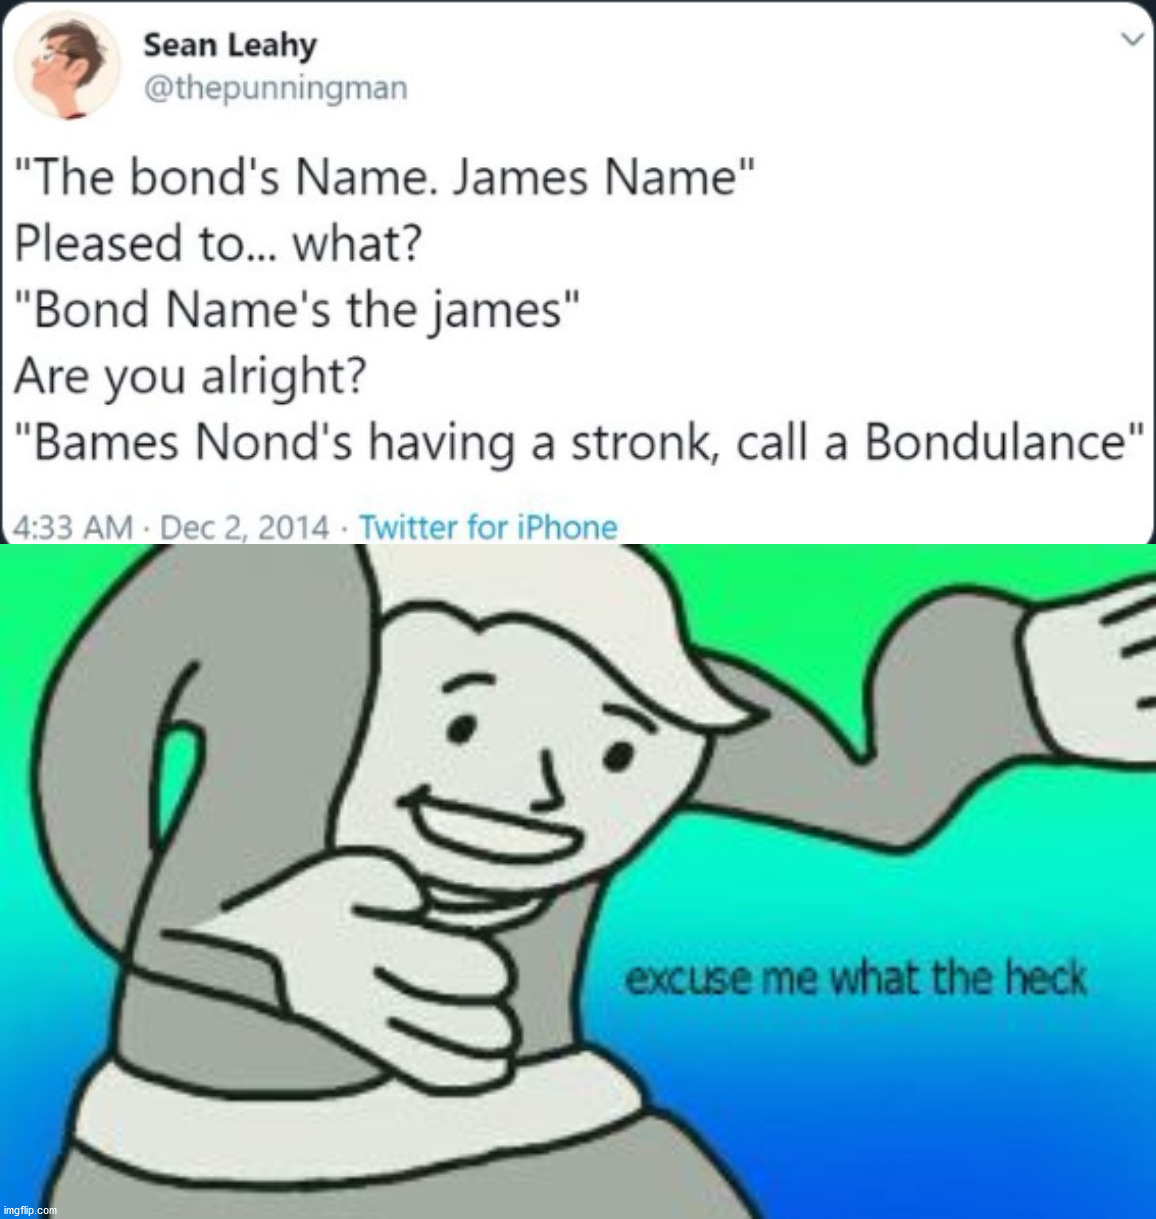 What the heck ;) | image tagged in excuse me what the heck,memes,funny,twitter,funny tweets,lmao | made w/ Imgflip meme maker